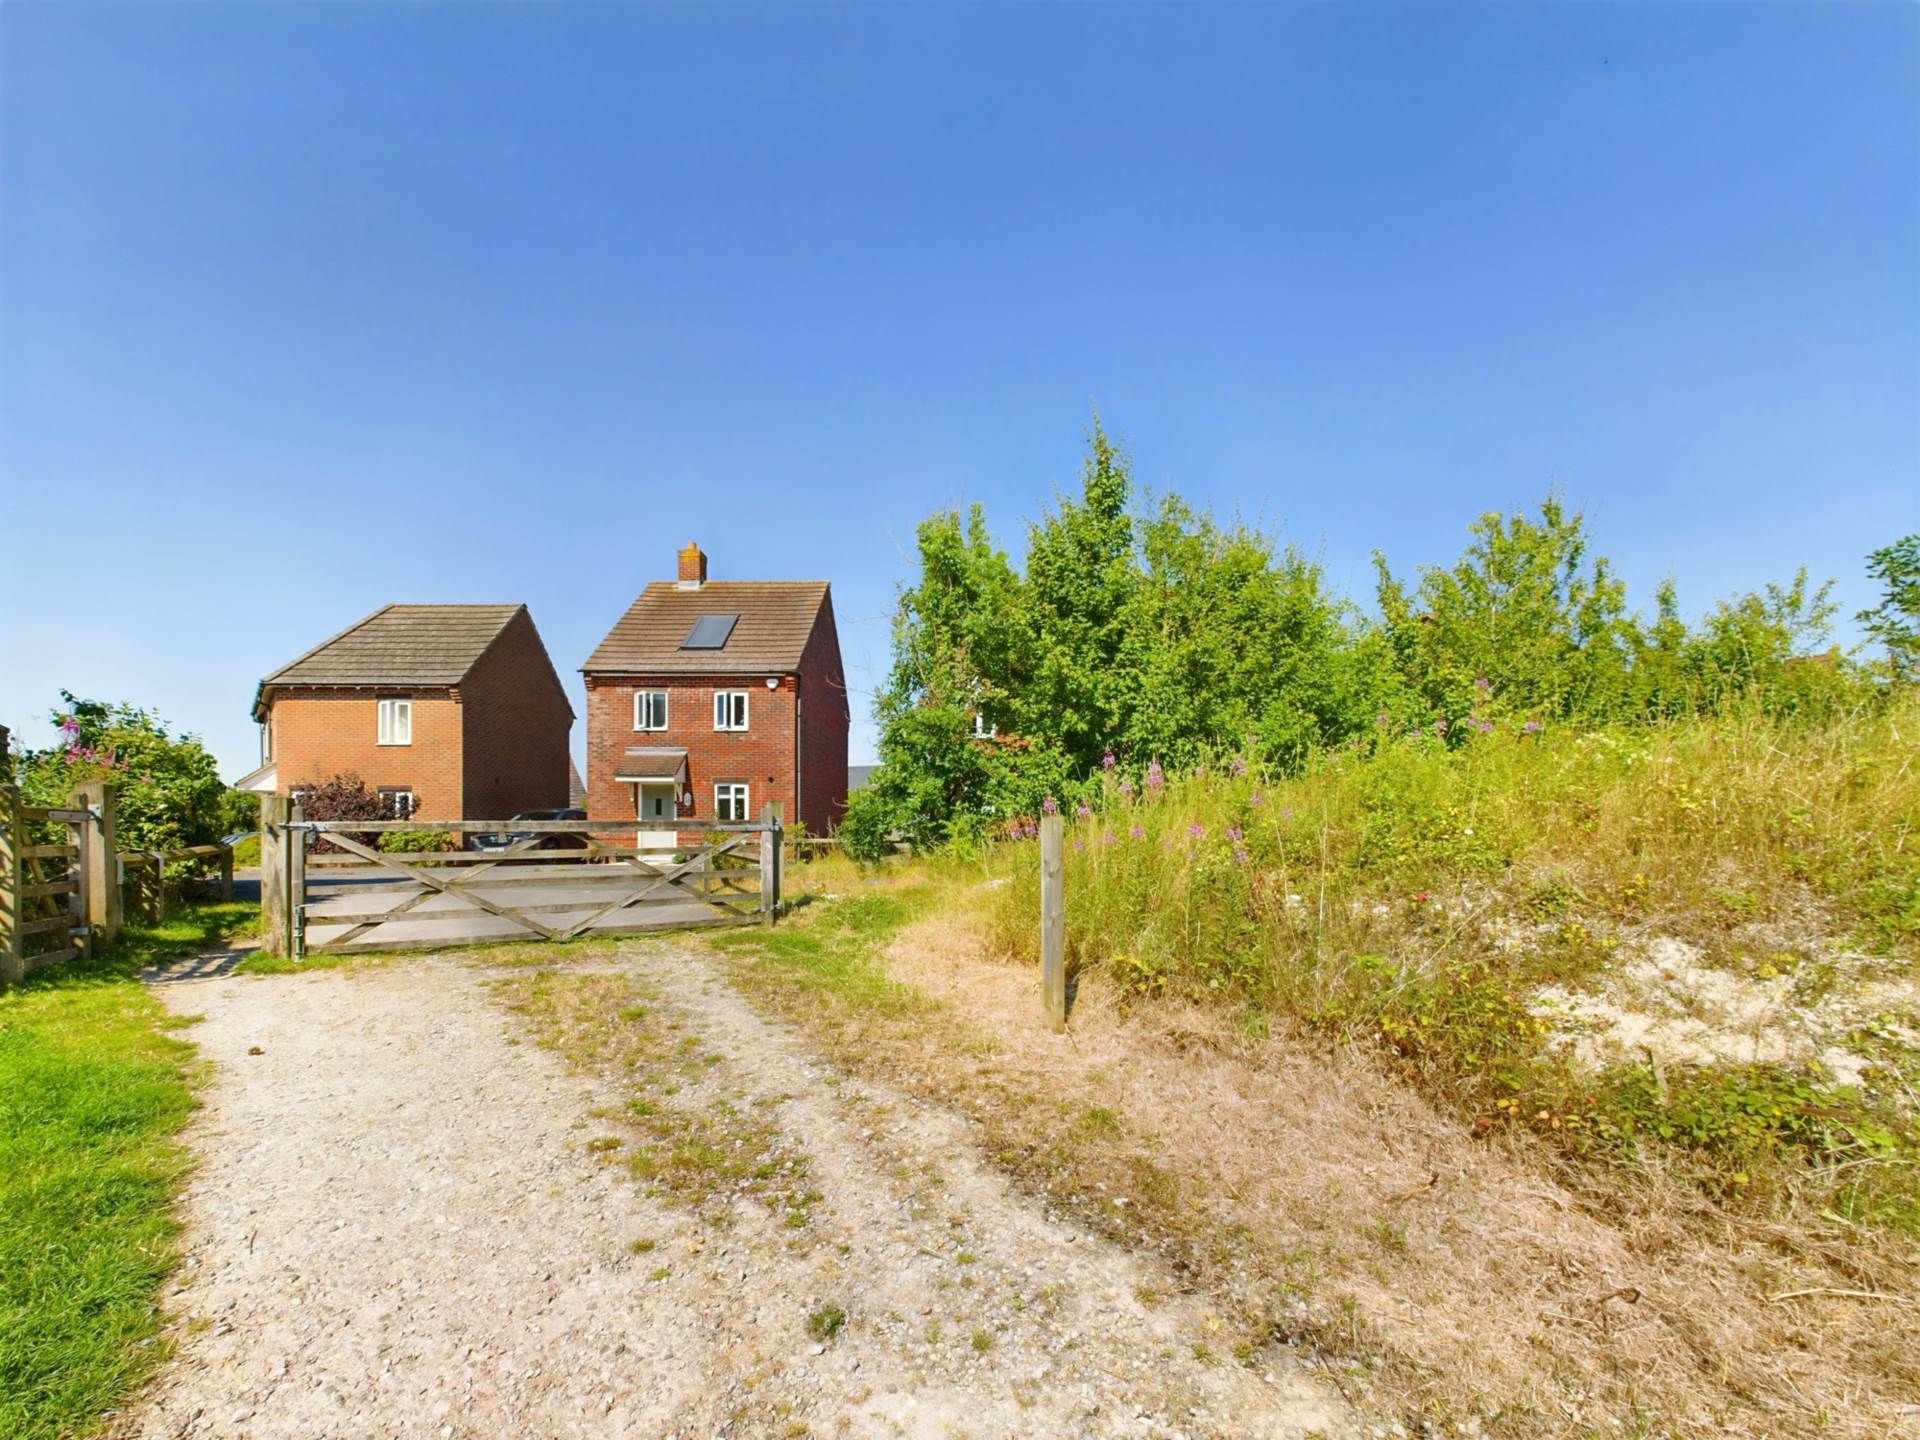 Lakeside Road, Chinnor &#8211; LOVELY VIEWS